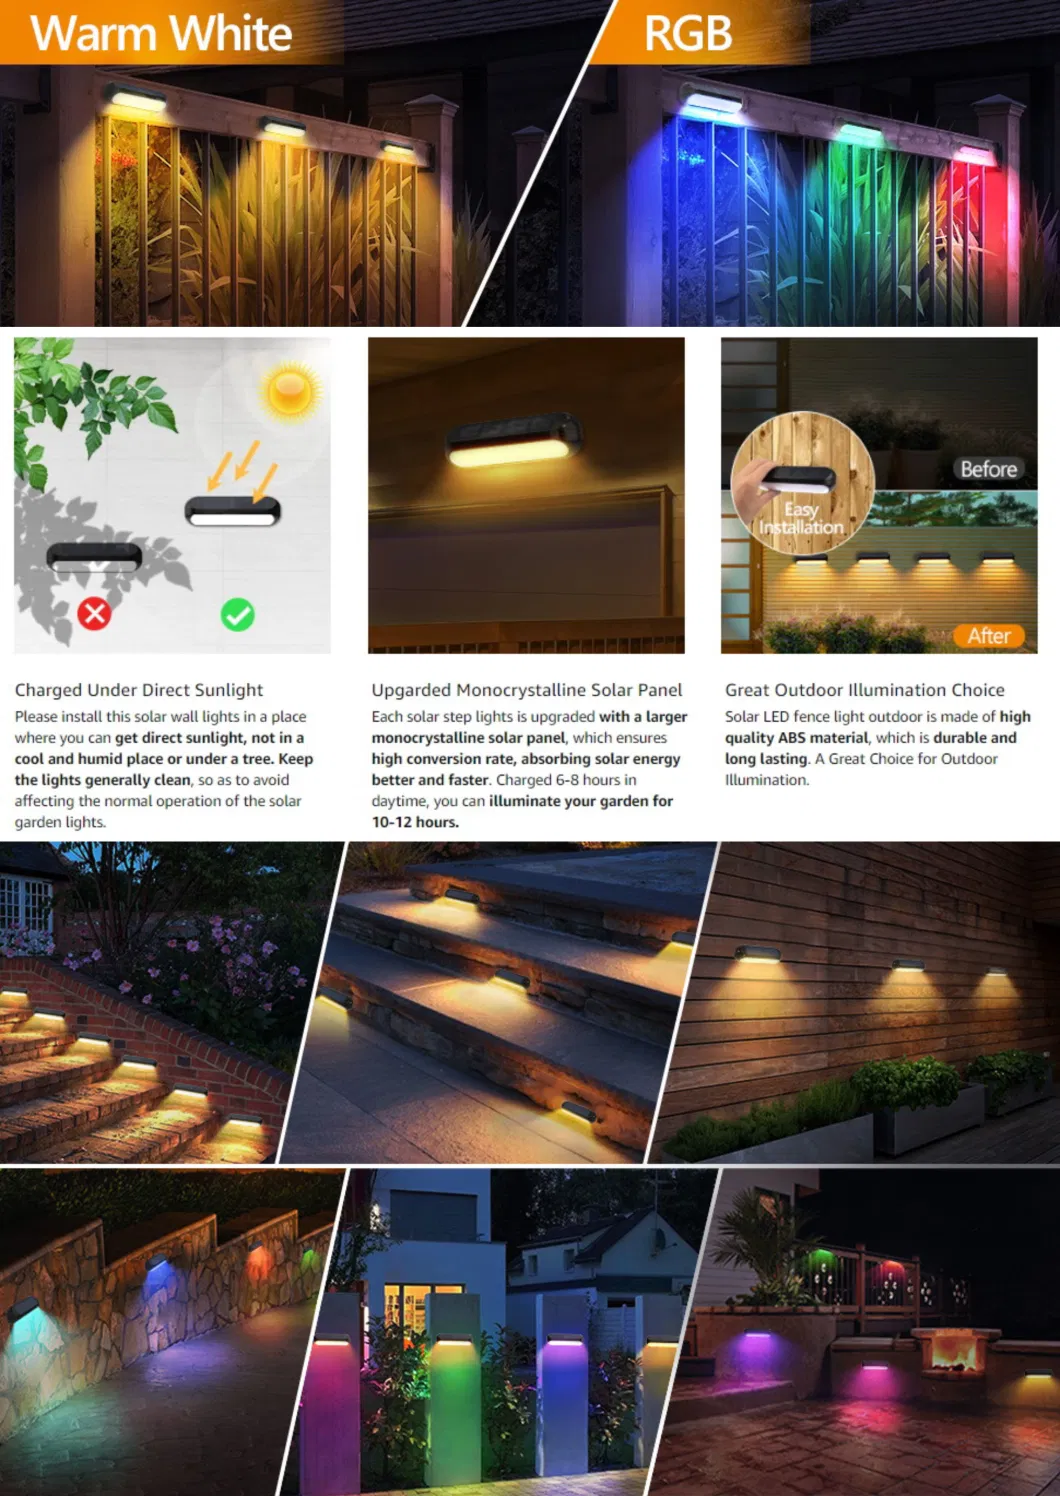 New RGB Solar Fence Lights with Color Changing Warm White Mode LED Solar Lights for Yard Garden Wall Deck Stairs